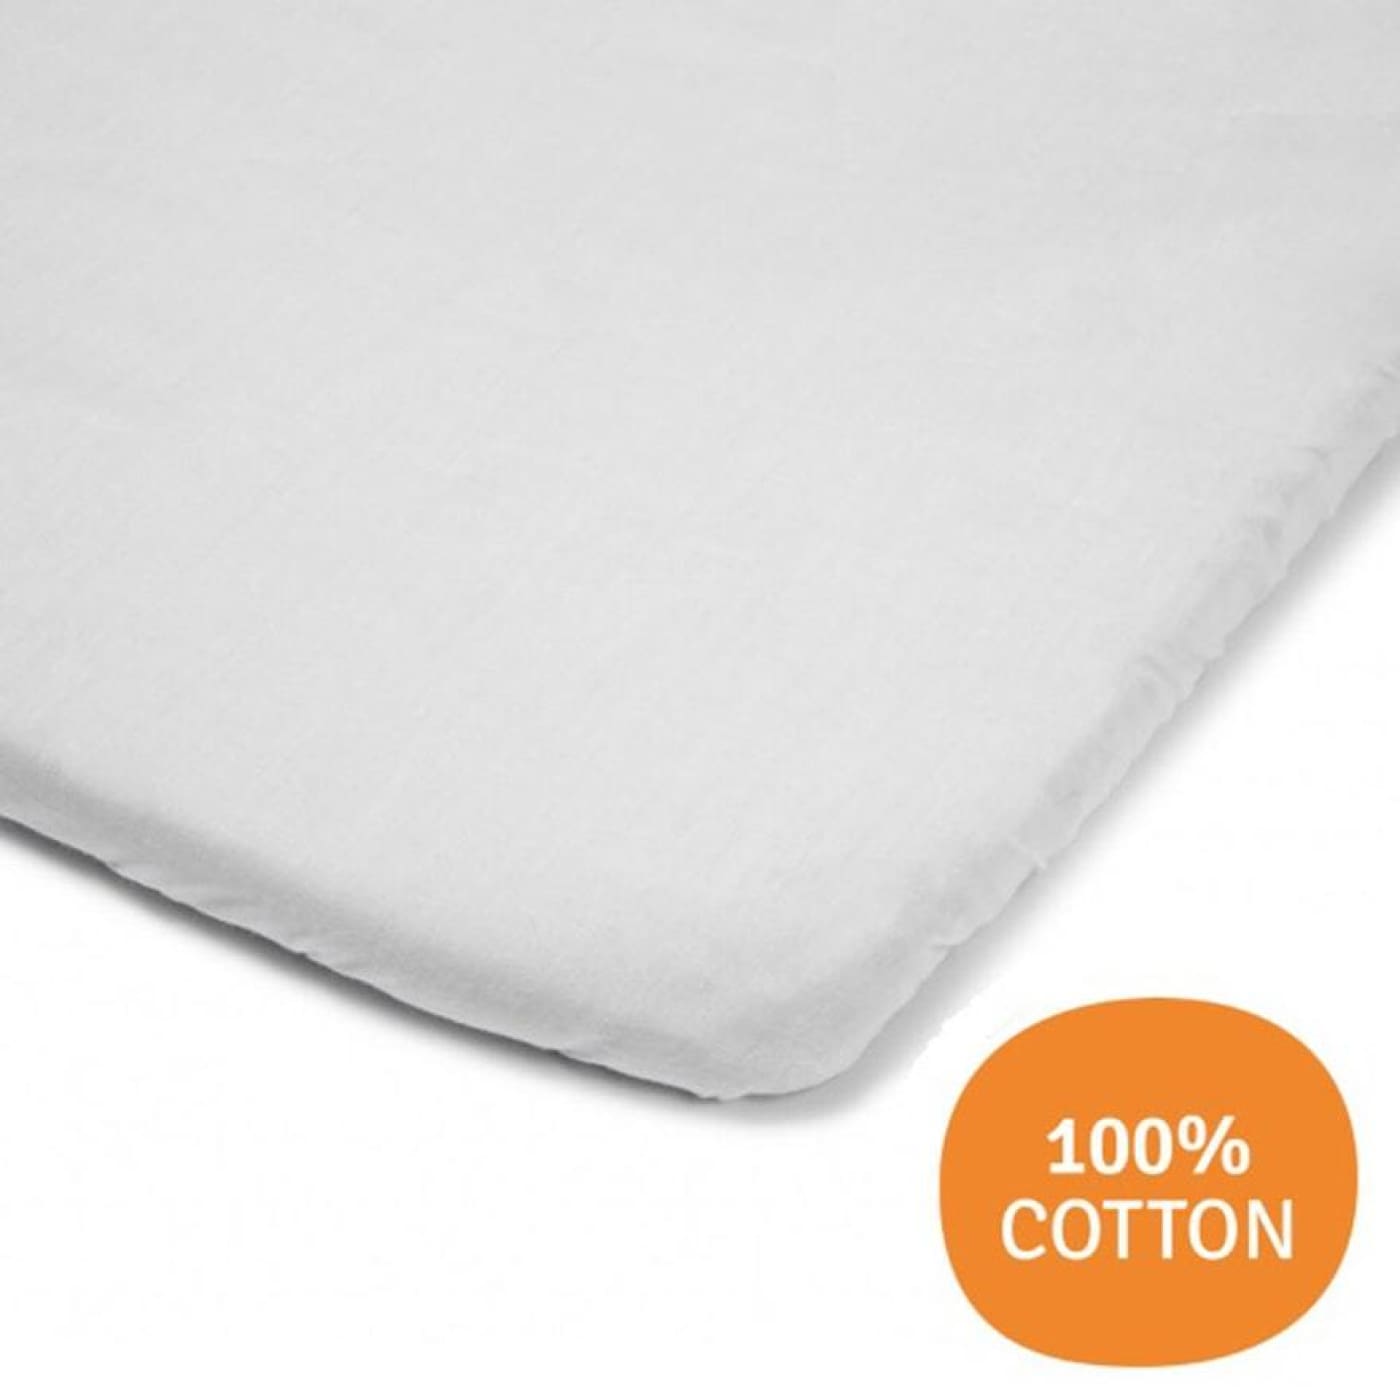 AeroMoov Instant Travel Cot Fitted Sheet - White - ON THE GO - PORTACOTS/ACCESSORIES